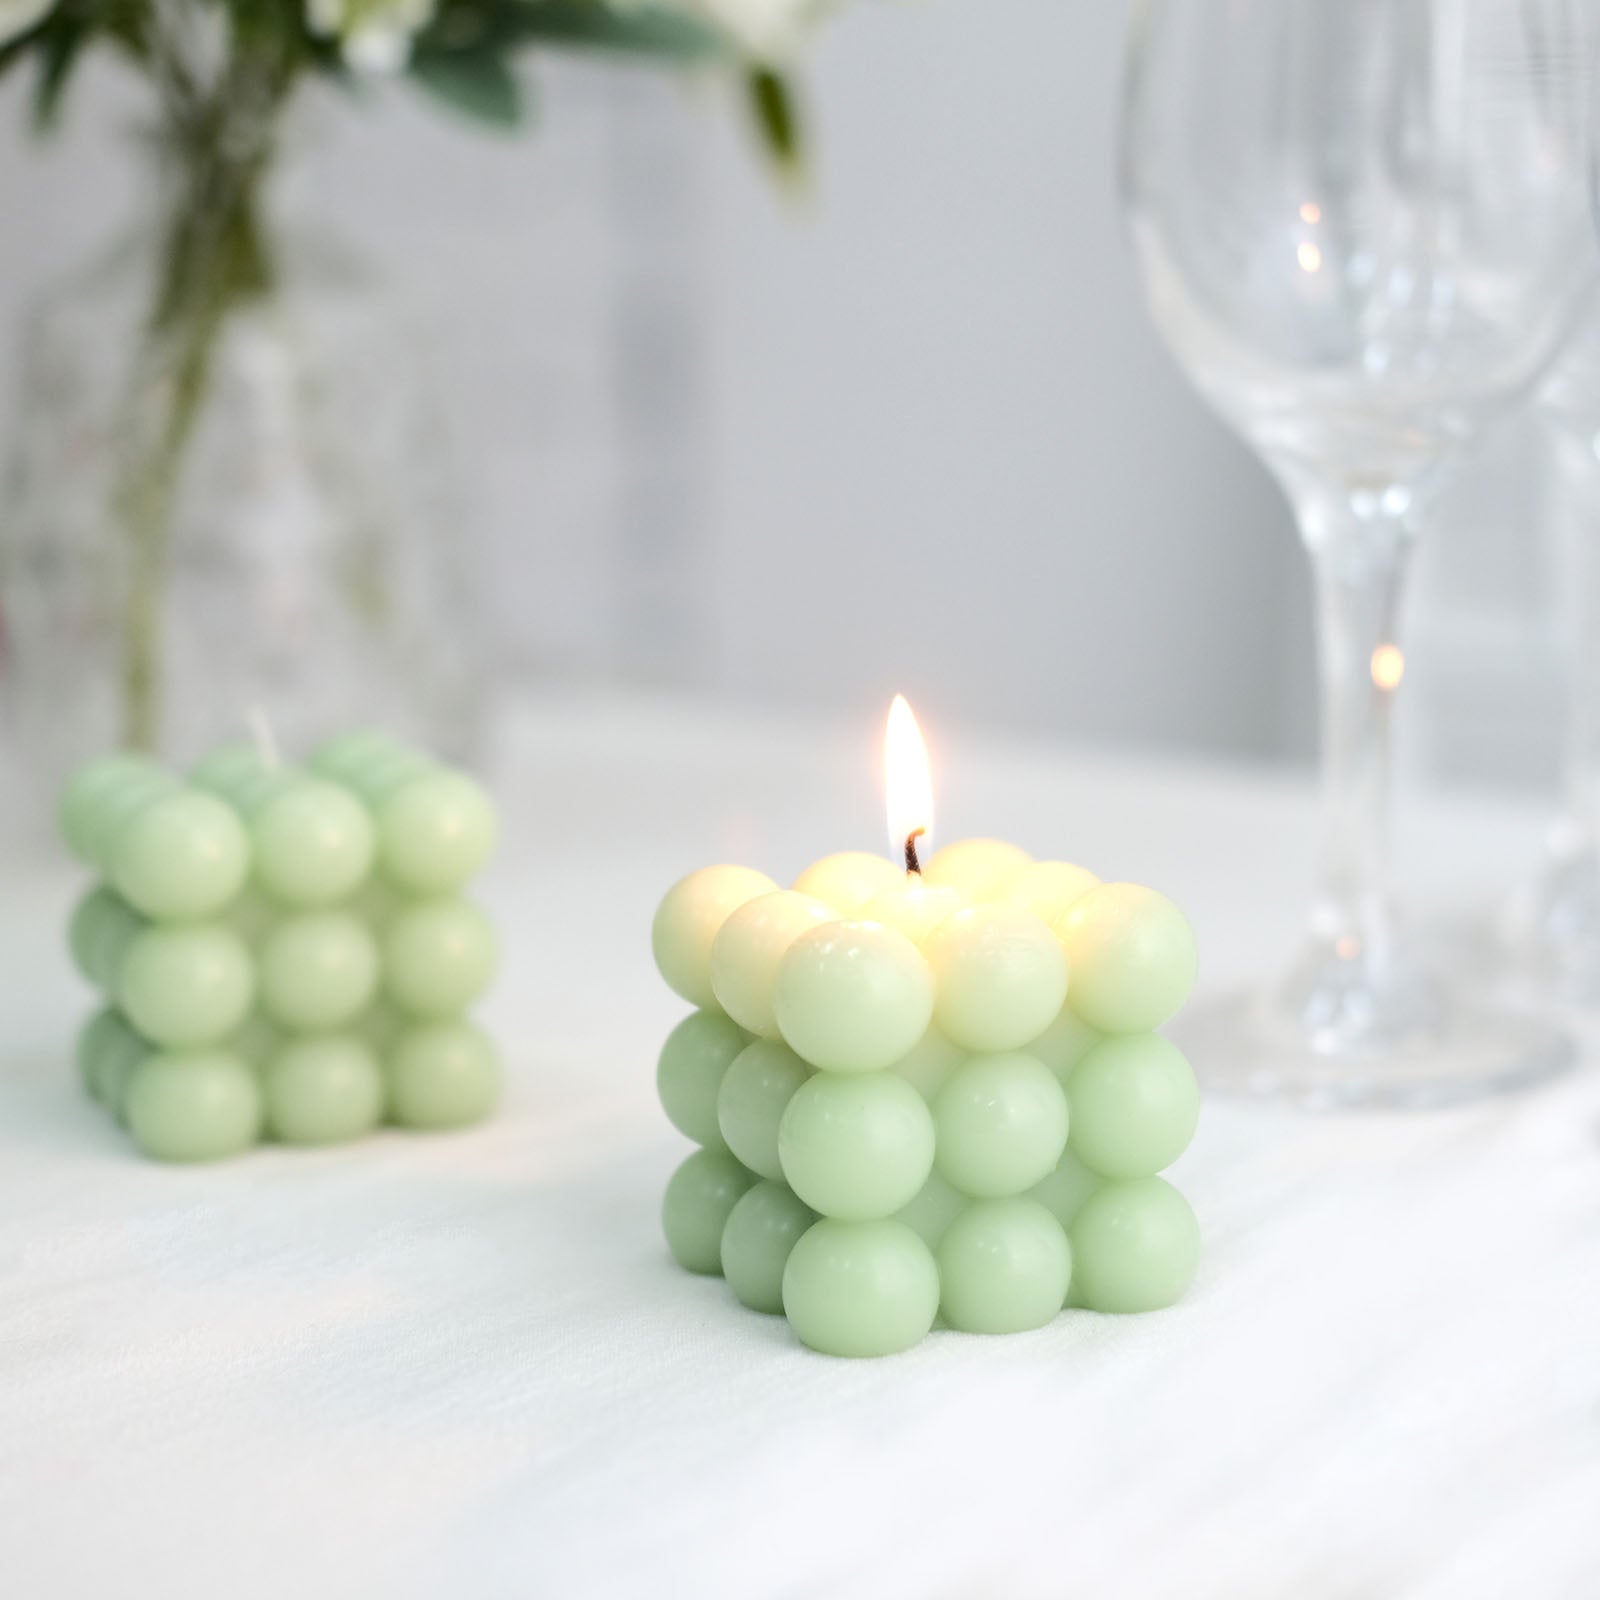 2 Bubble Cube Unscented Paraffin Wax Candles Wedding Centerpieces - Sage GReen